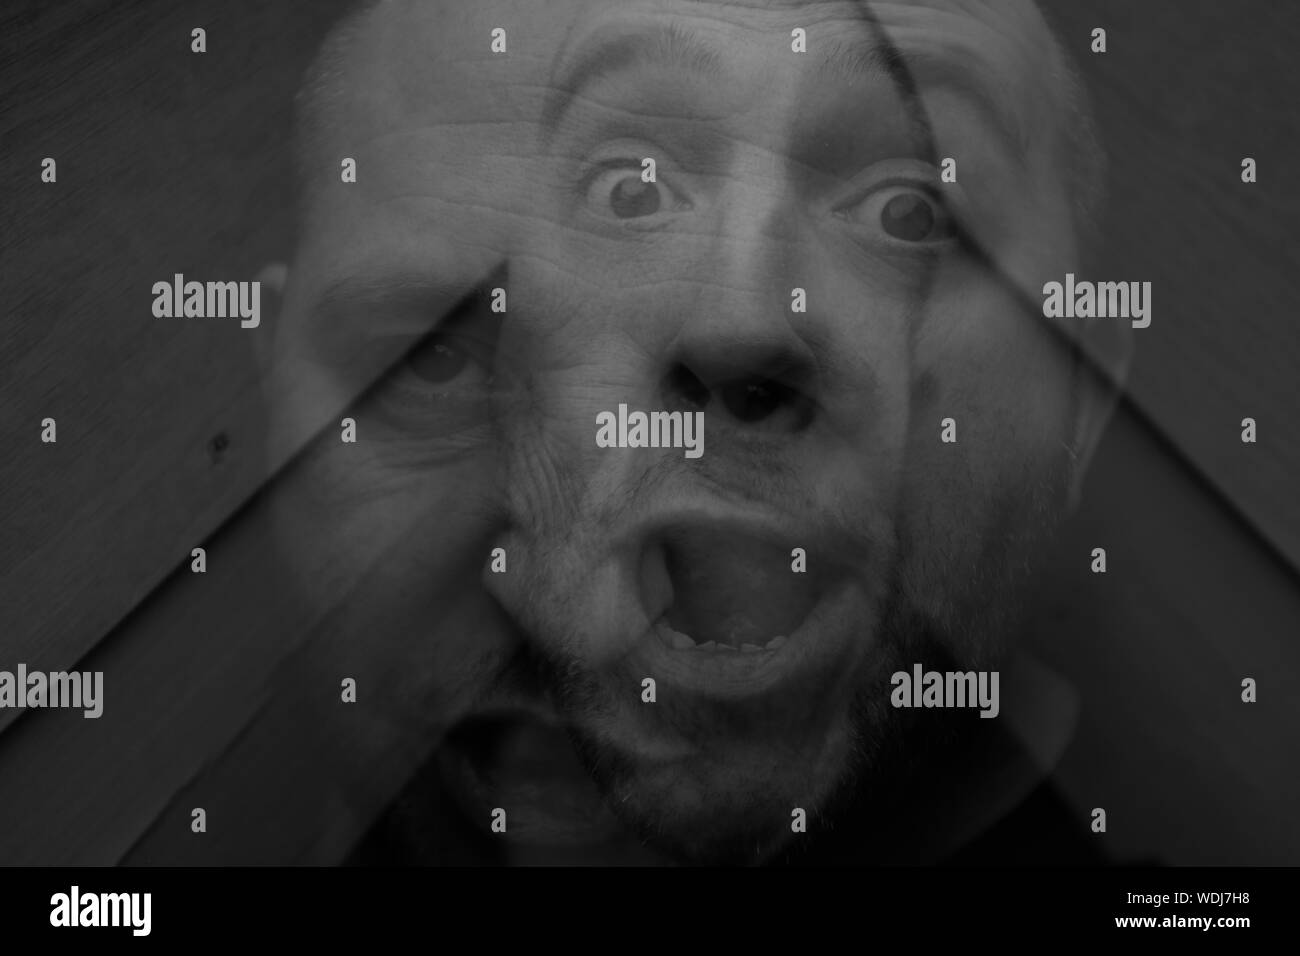 Double Exposure Of Man With Facial Expression Stock Photo